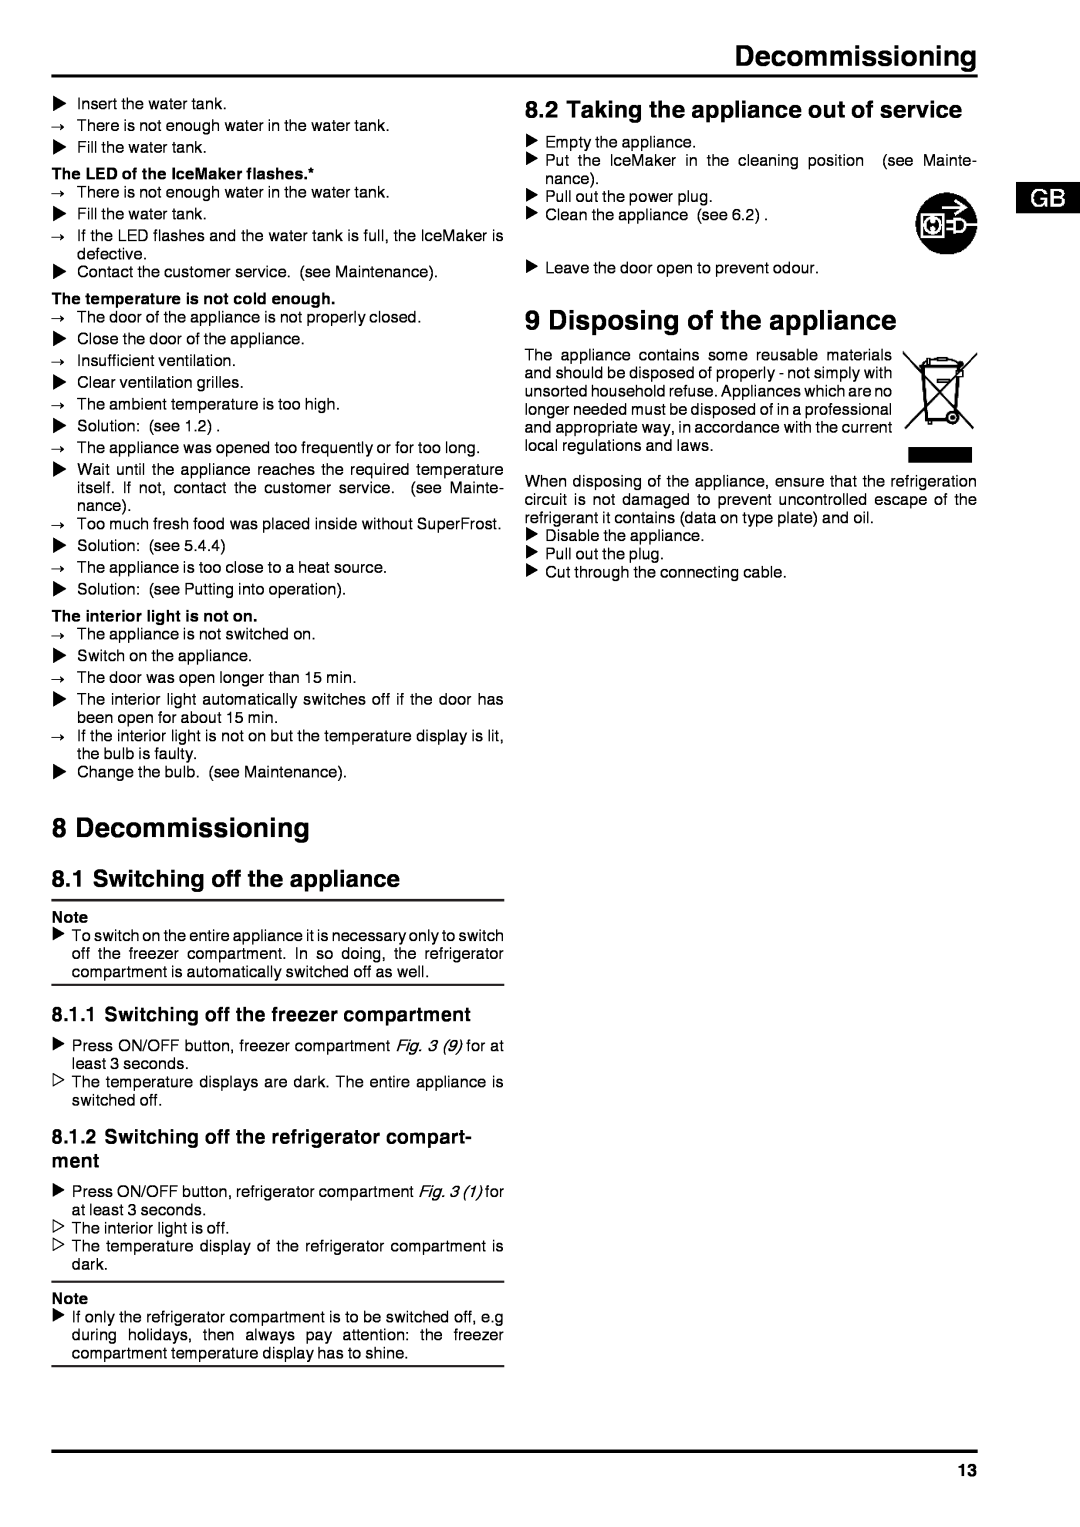 Liebherr 7084376 - 03 operating instructions Decommissioning, Disposing of the appliance, Switching off the appliance 